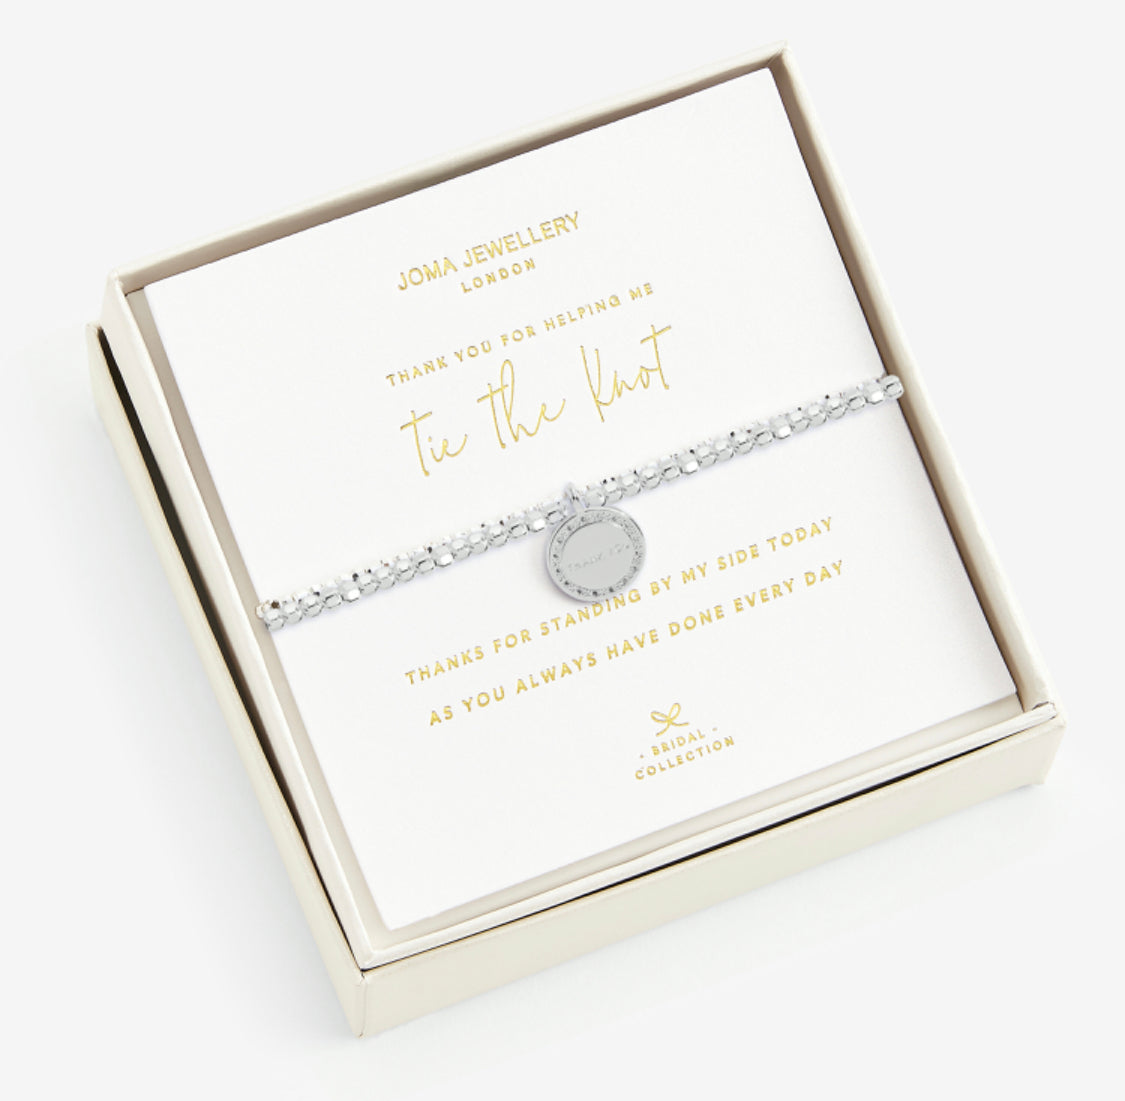 Joma Jewellery- Boxed Bridal Jewellery- Thank You For Helping Me Tie The Knot